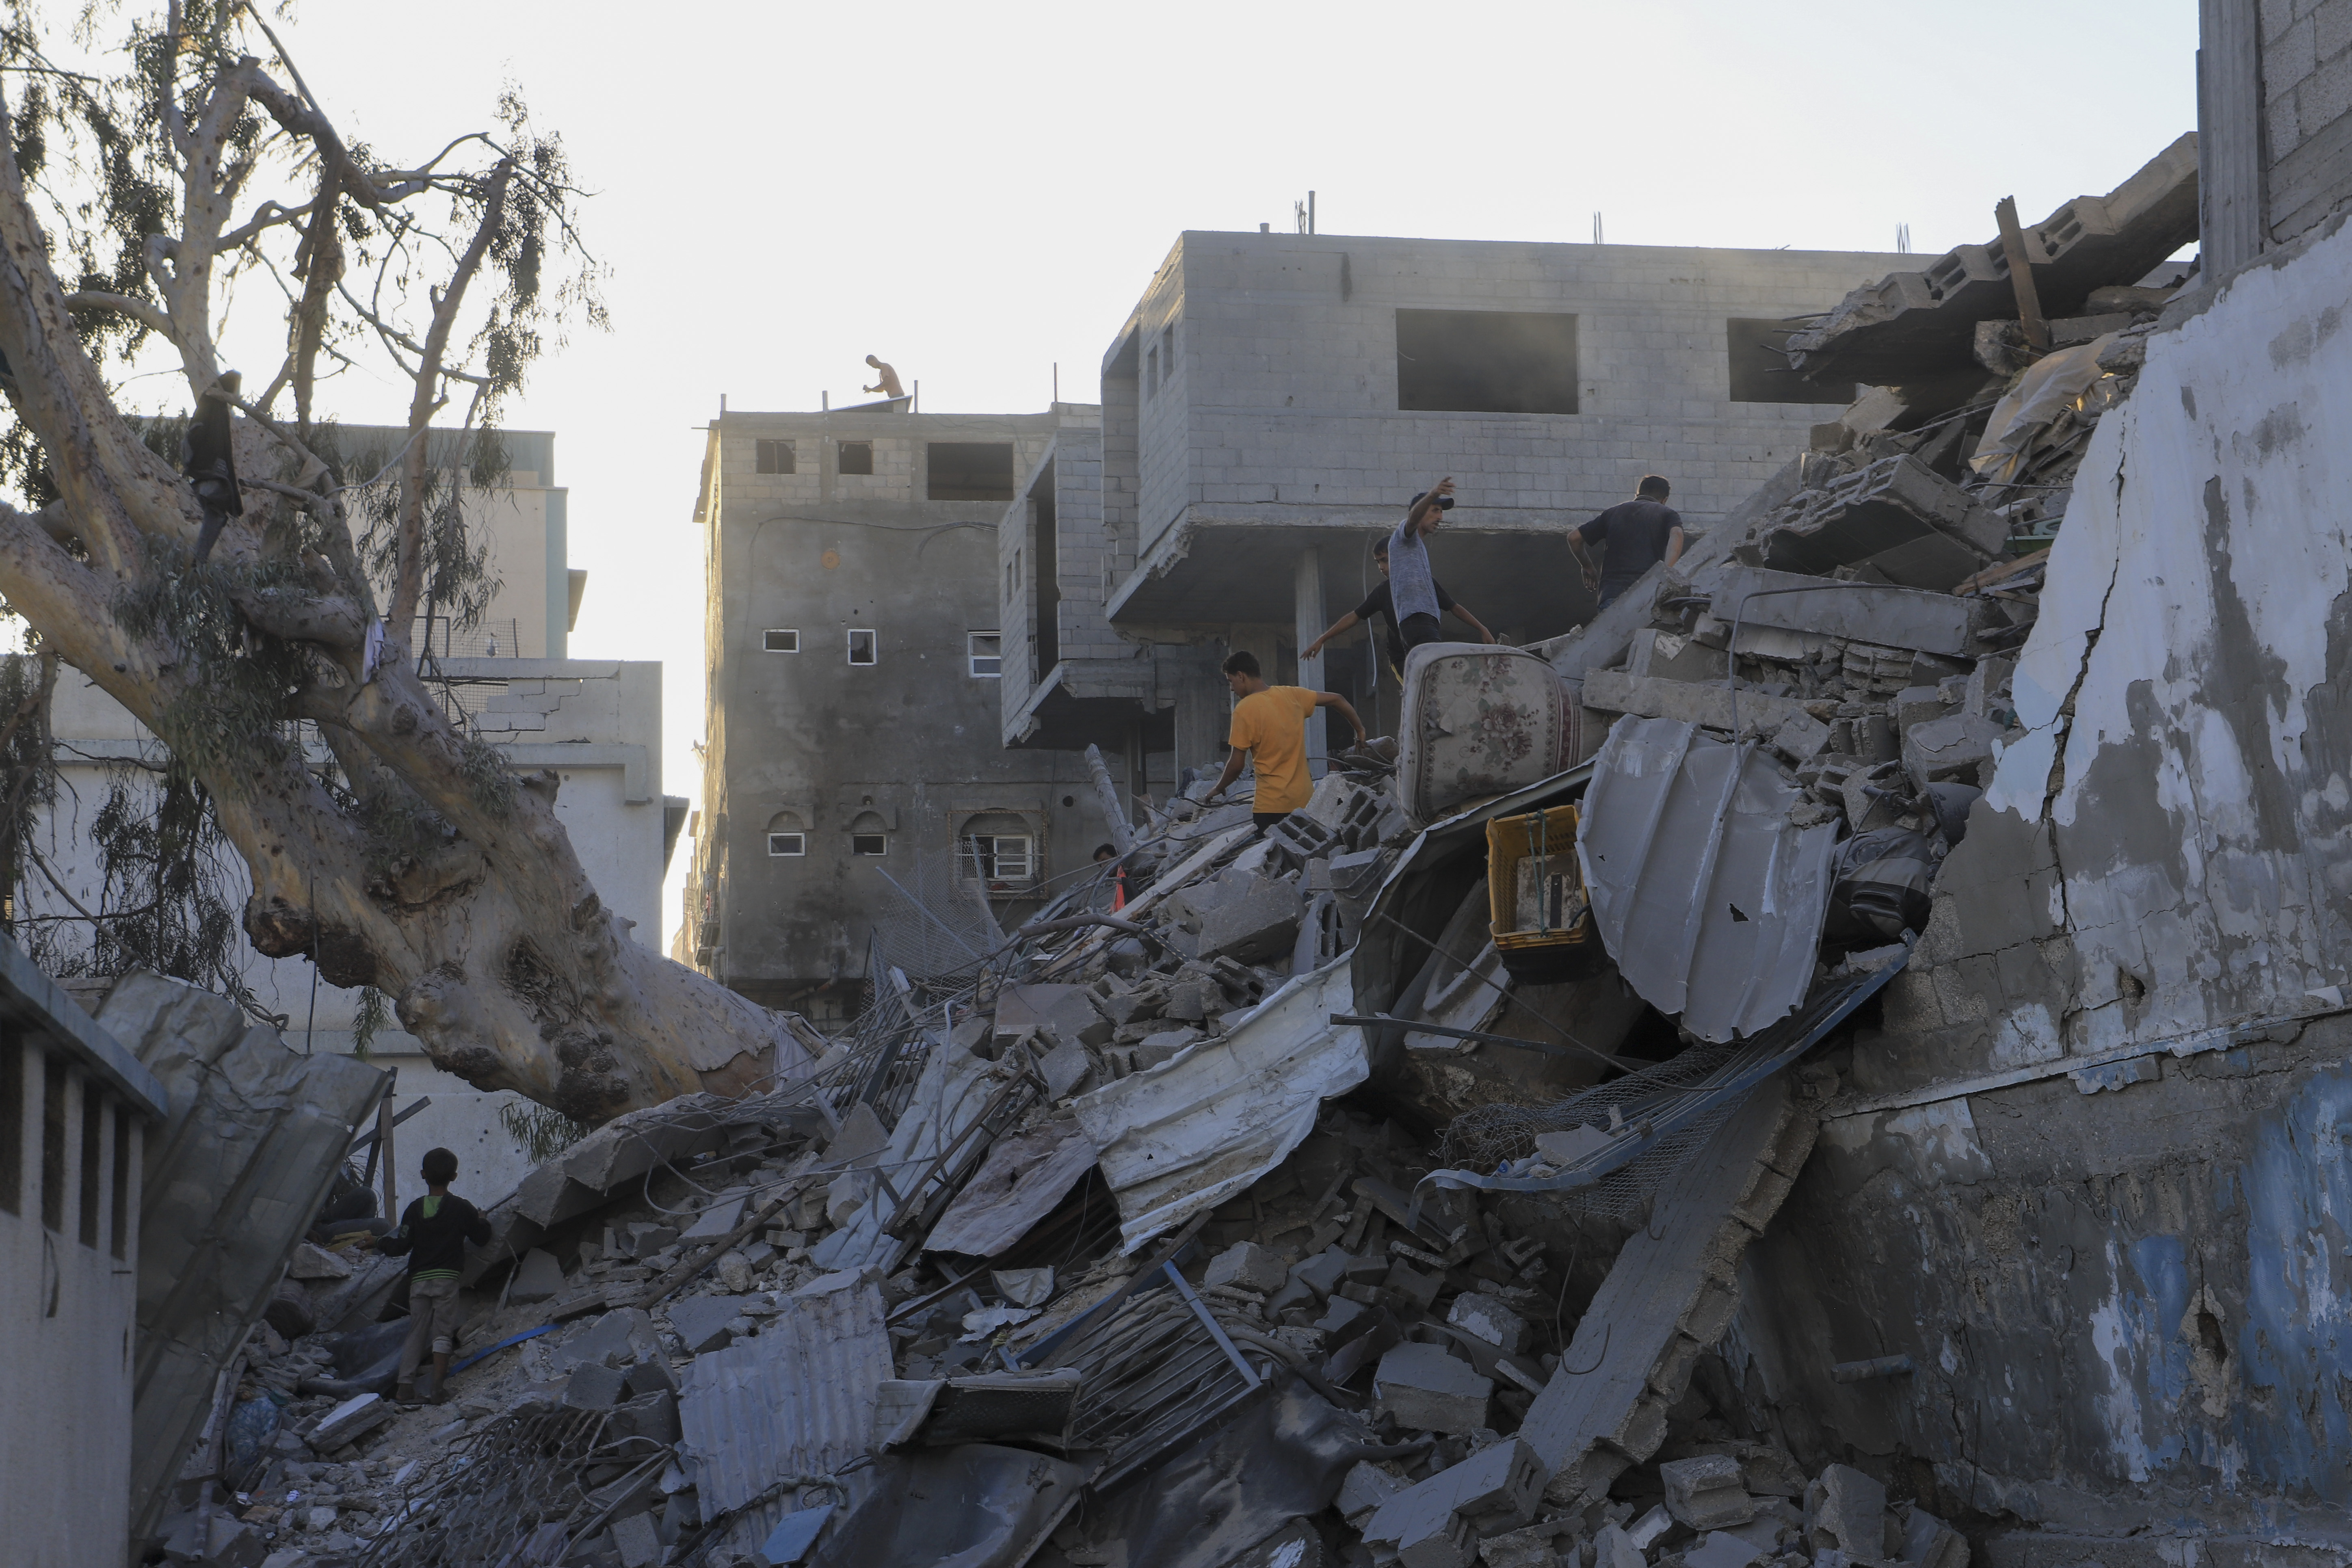 Palestinians search for bodies and survivors in the rubble of a residential building destroyed in an Israeli airstrike in Khan Younis, Gaza Strip, Wednesday, July 3, 2024. (AP Photo /Jehad Alshrafi)